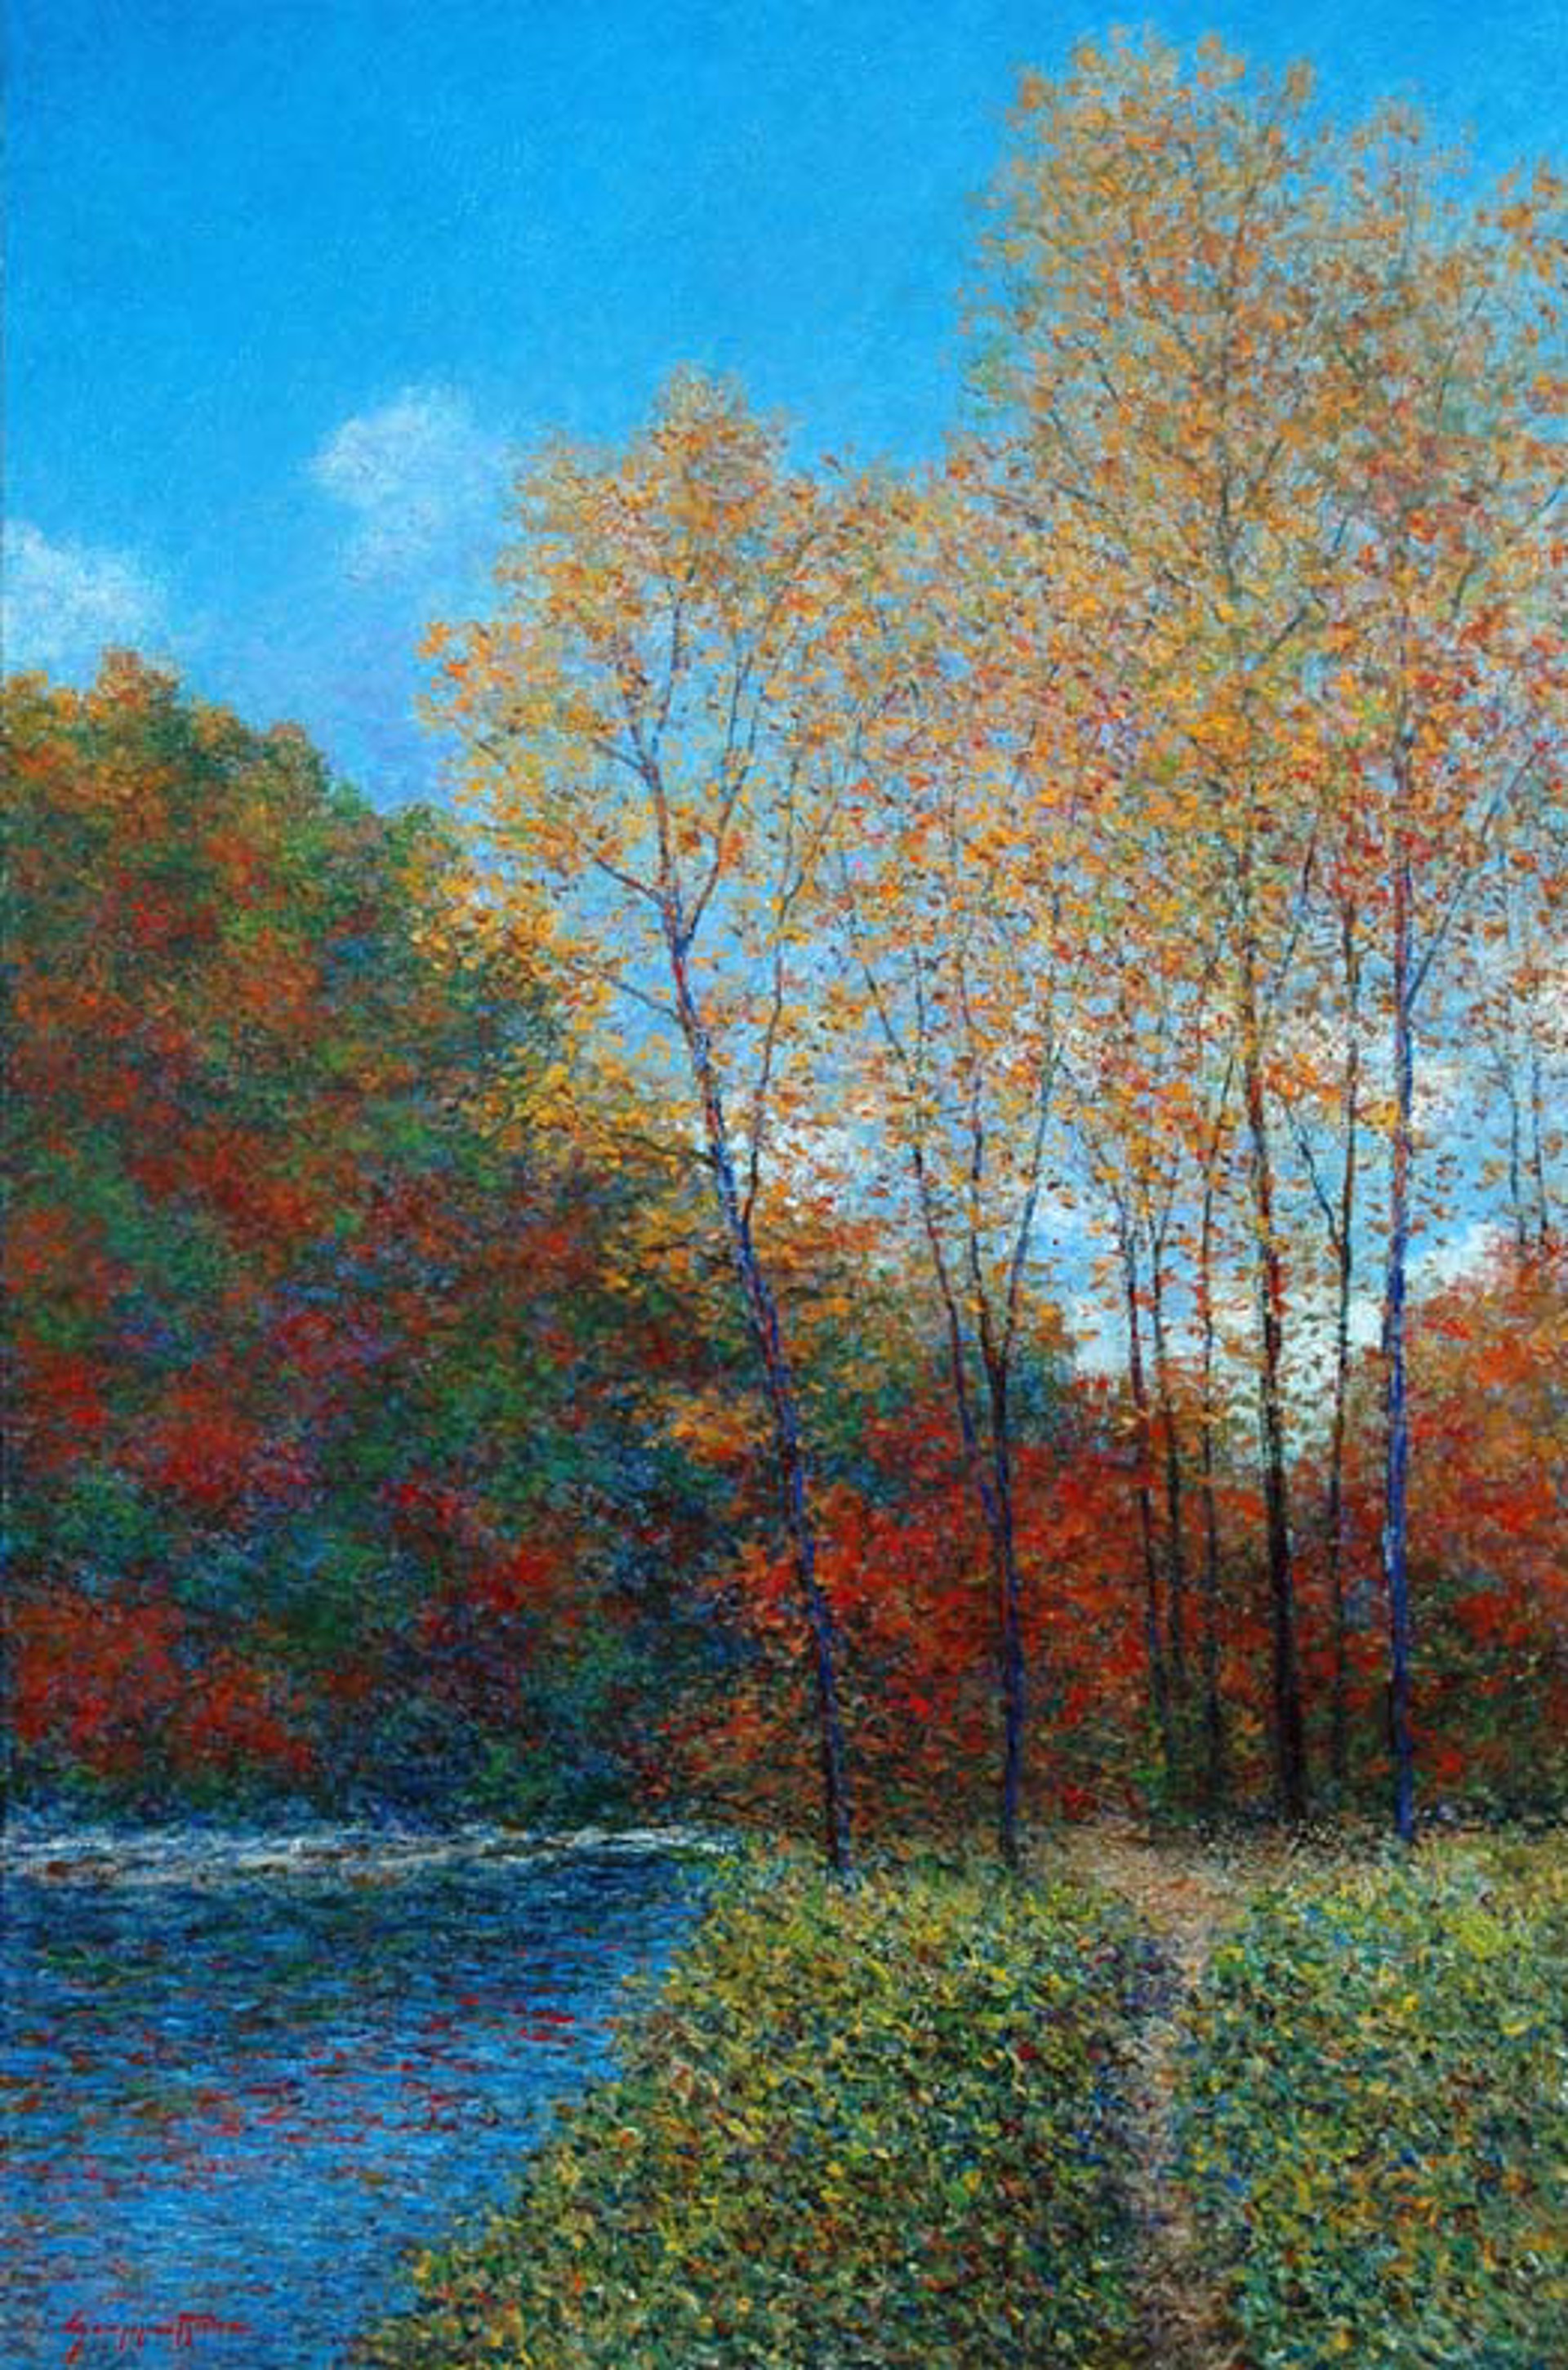 The River In Autumn by James Scoppettone